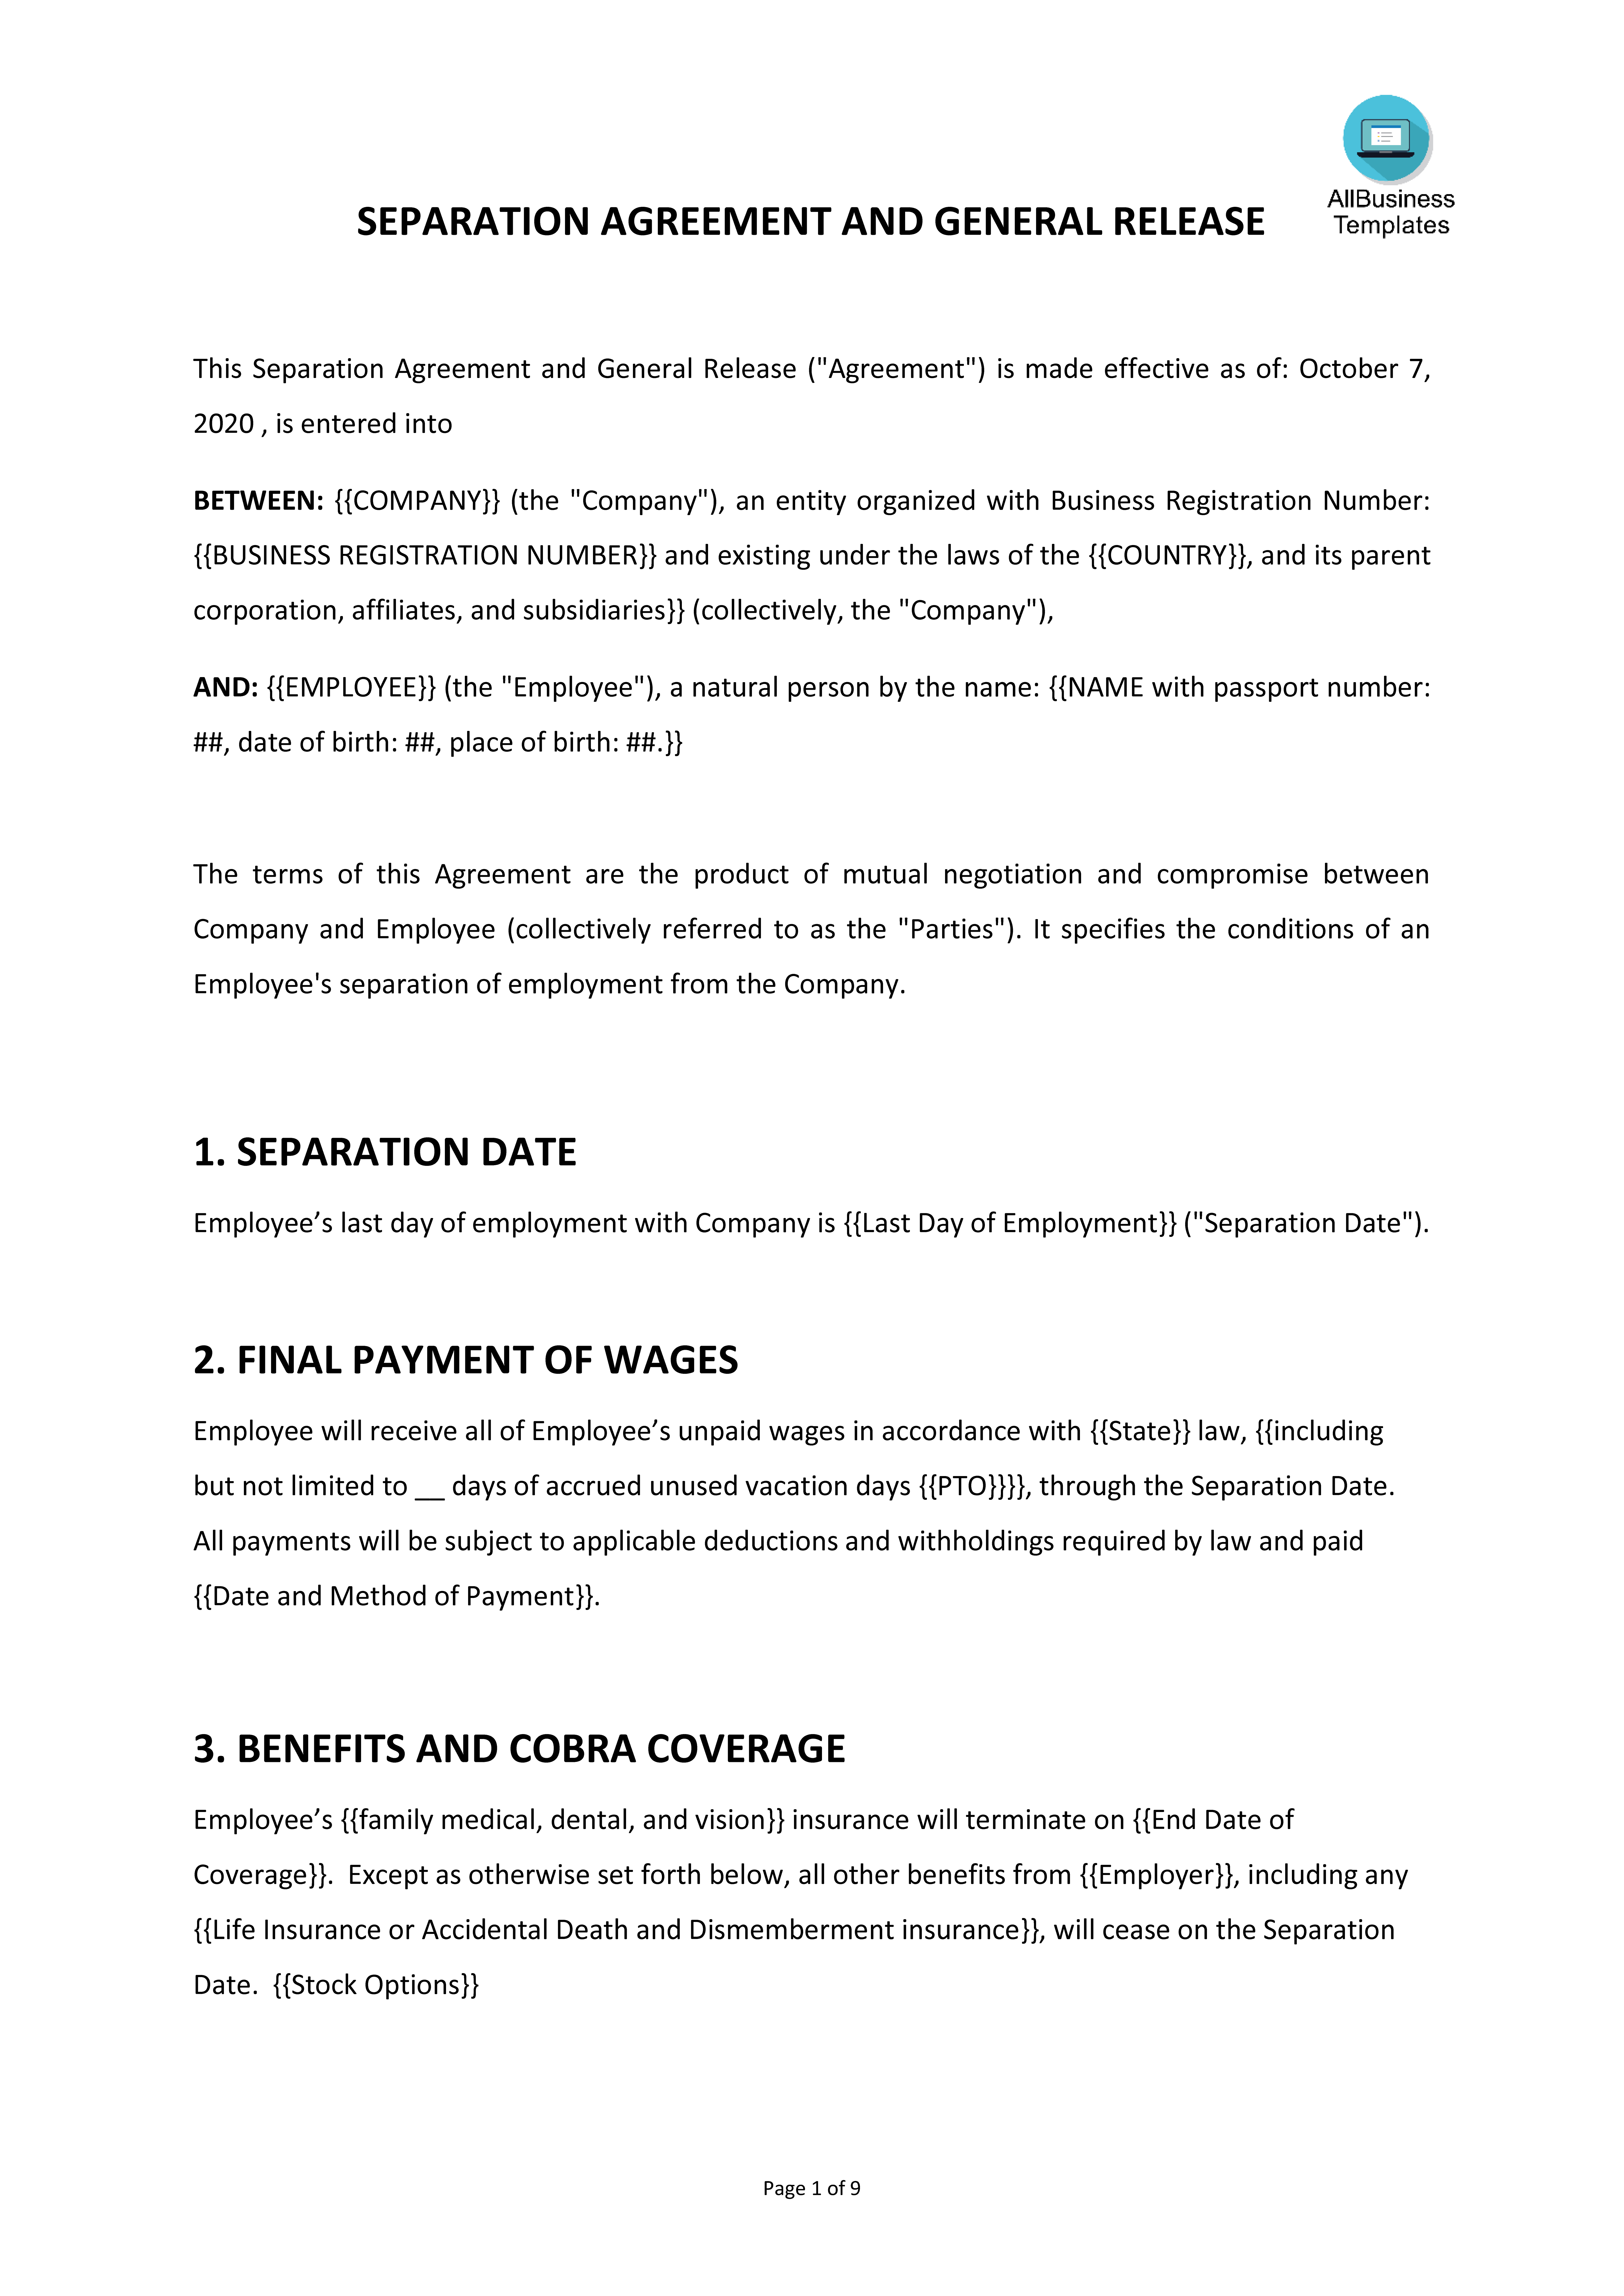 Employee Separation Agreement template 模板